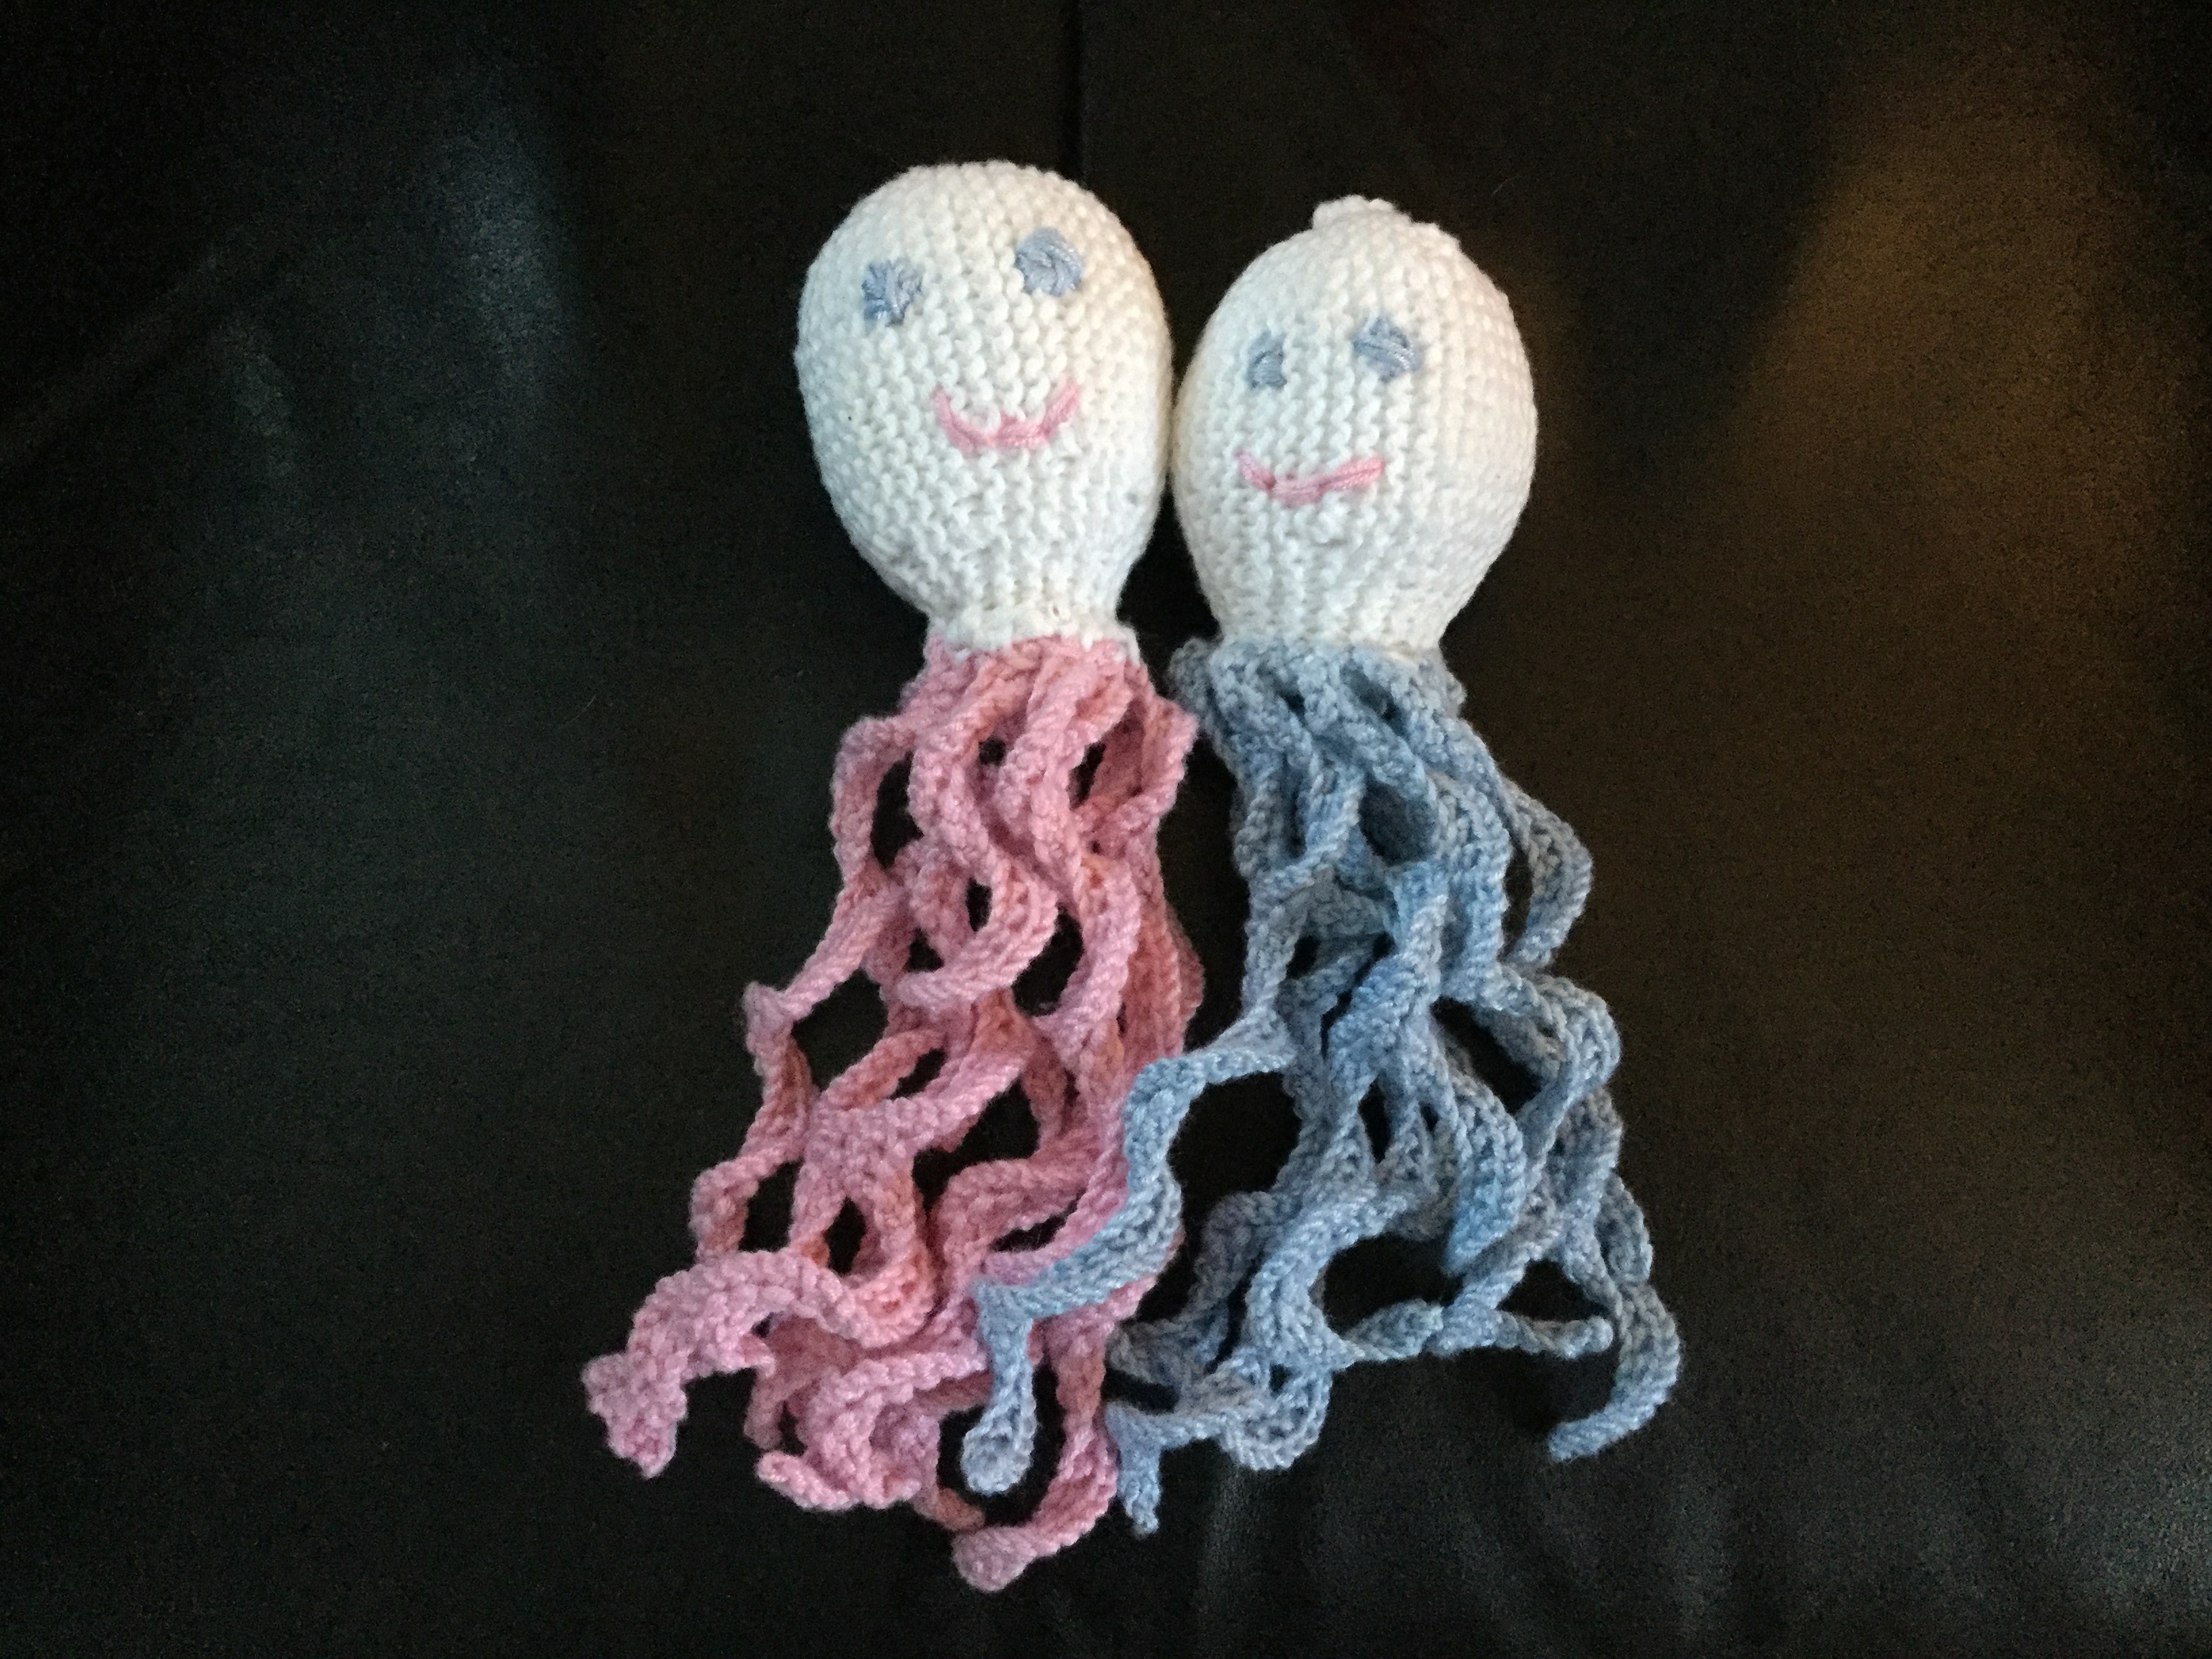 Octopus for preemie knitting project by Tabitha S